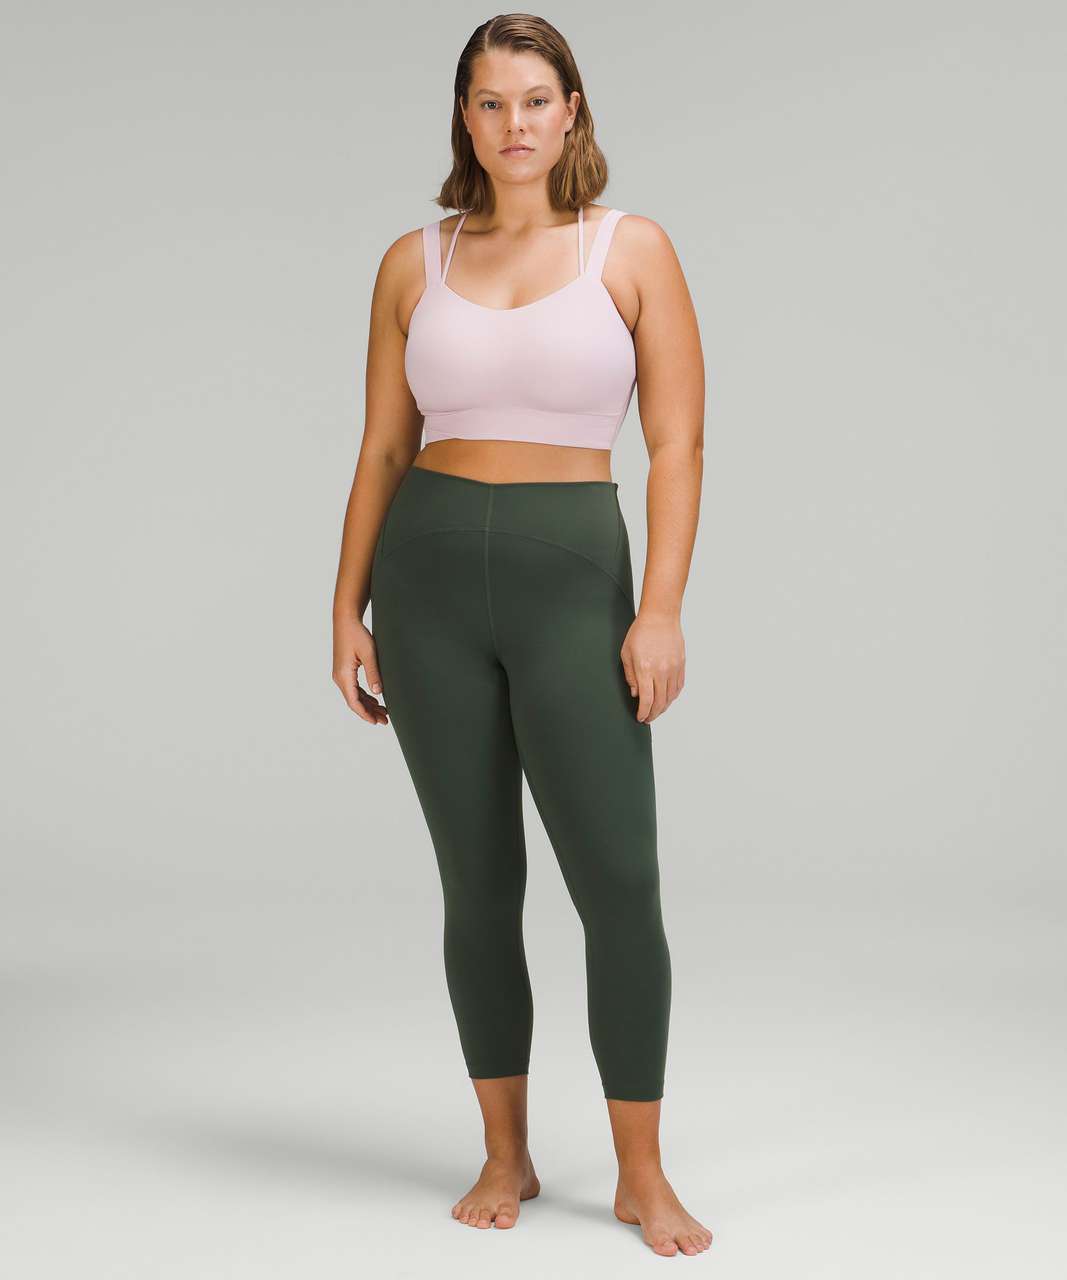 Lululemon INSTILL High-Rise Tight 25 Size 4 - $80 New With Tags - From  Maddie